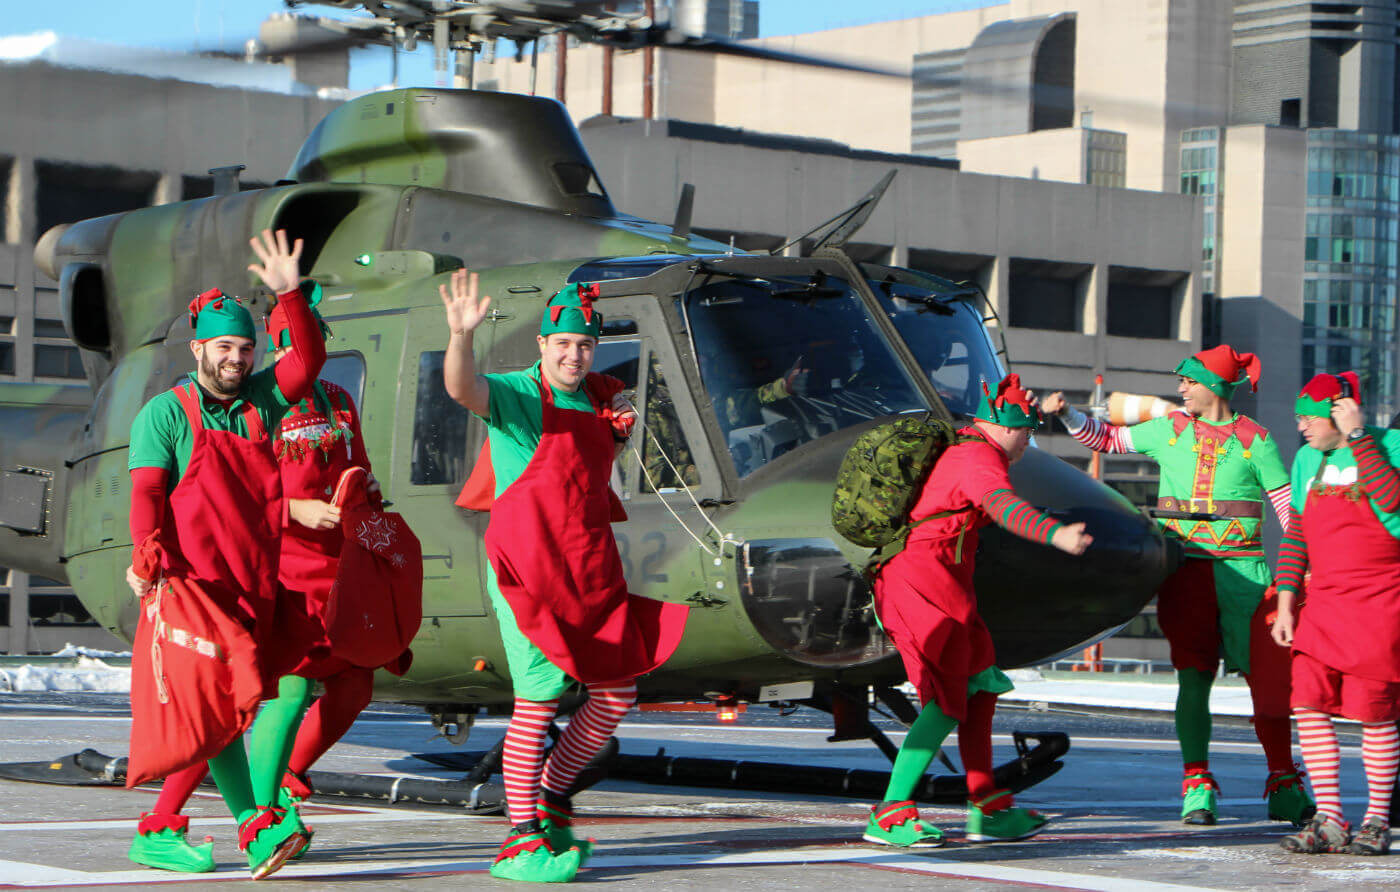 It's go time! The elves arrive on the rooftop helipad at SickKids hospital. Steve Bigg Photo